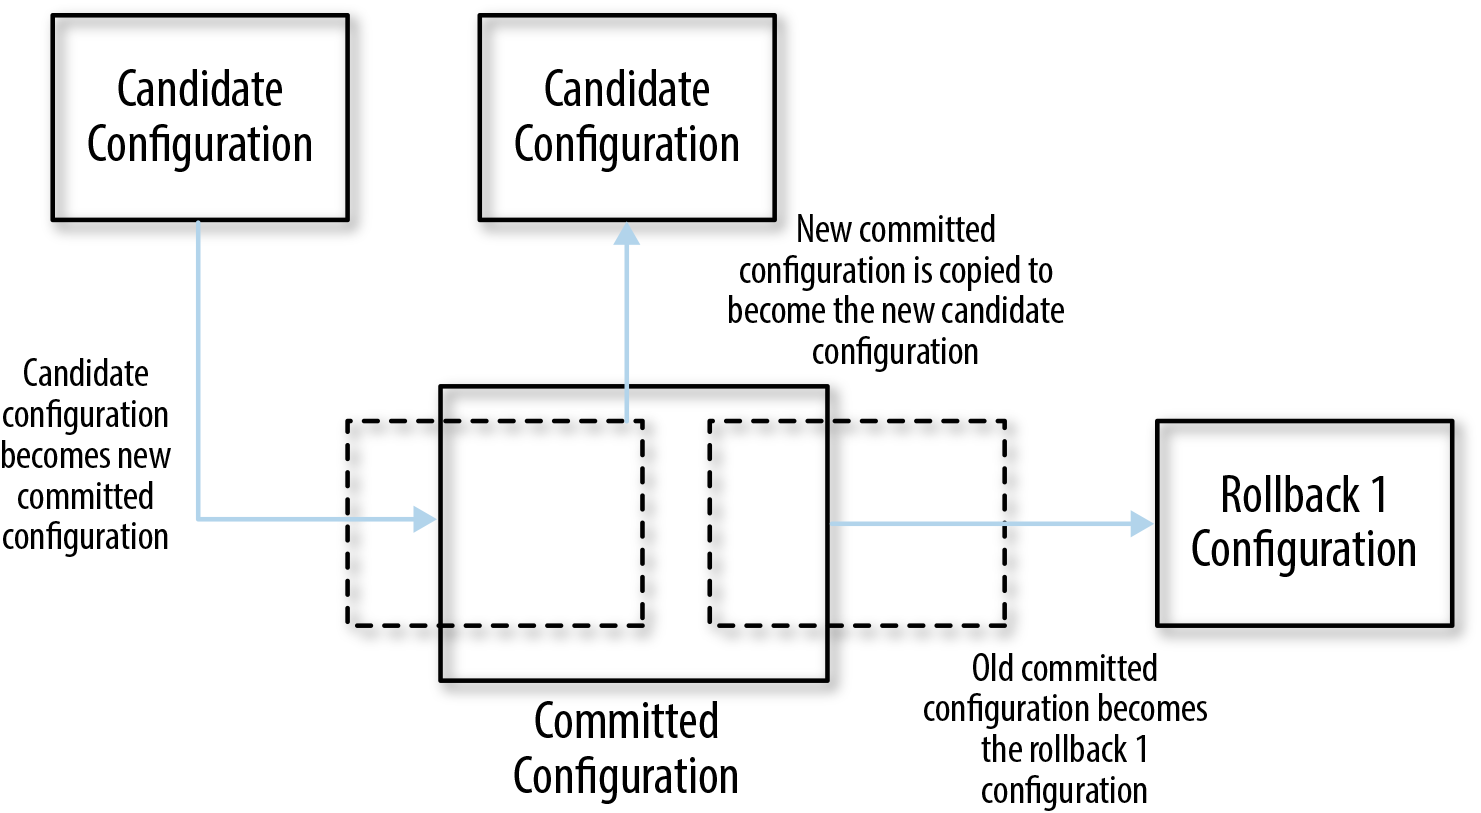 This figure shows the way the configuration databases are
            changed during a commit operation. The candidate configuration
            becomes the committed configuration. The software makes a copy of
            the new committed configuration and uses it as the candidate
            configuration.